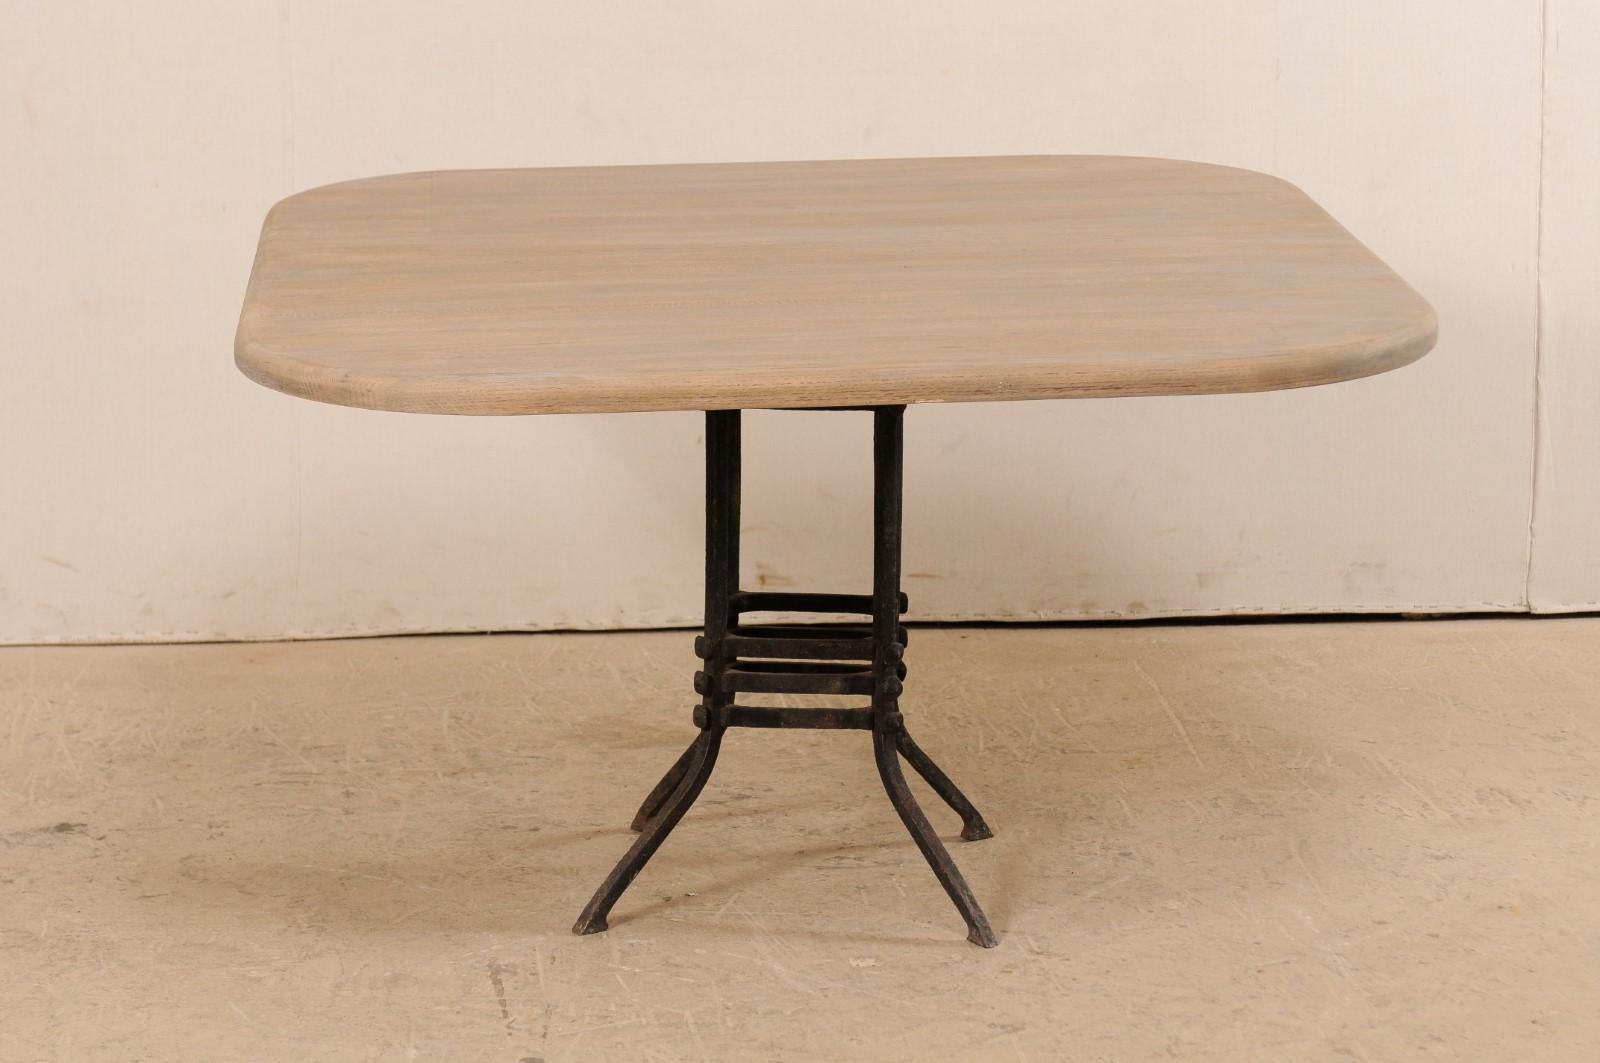 A French square-shaped wood top table with 19th century iron base. This custom table has been fashioned with a reclaimed wood top, which is square in shape with rounded corners, which is raised upon a 19th century French black iron base. The base